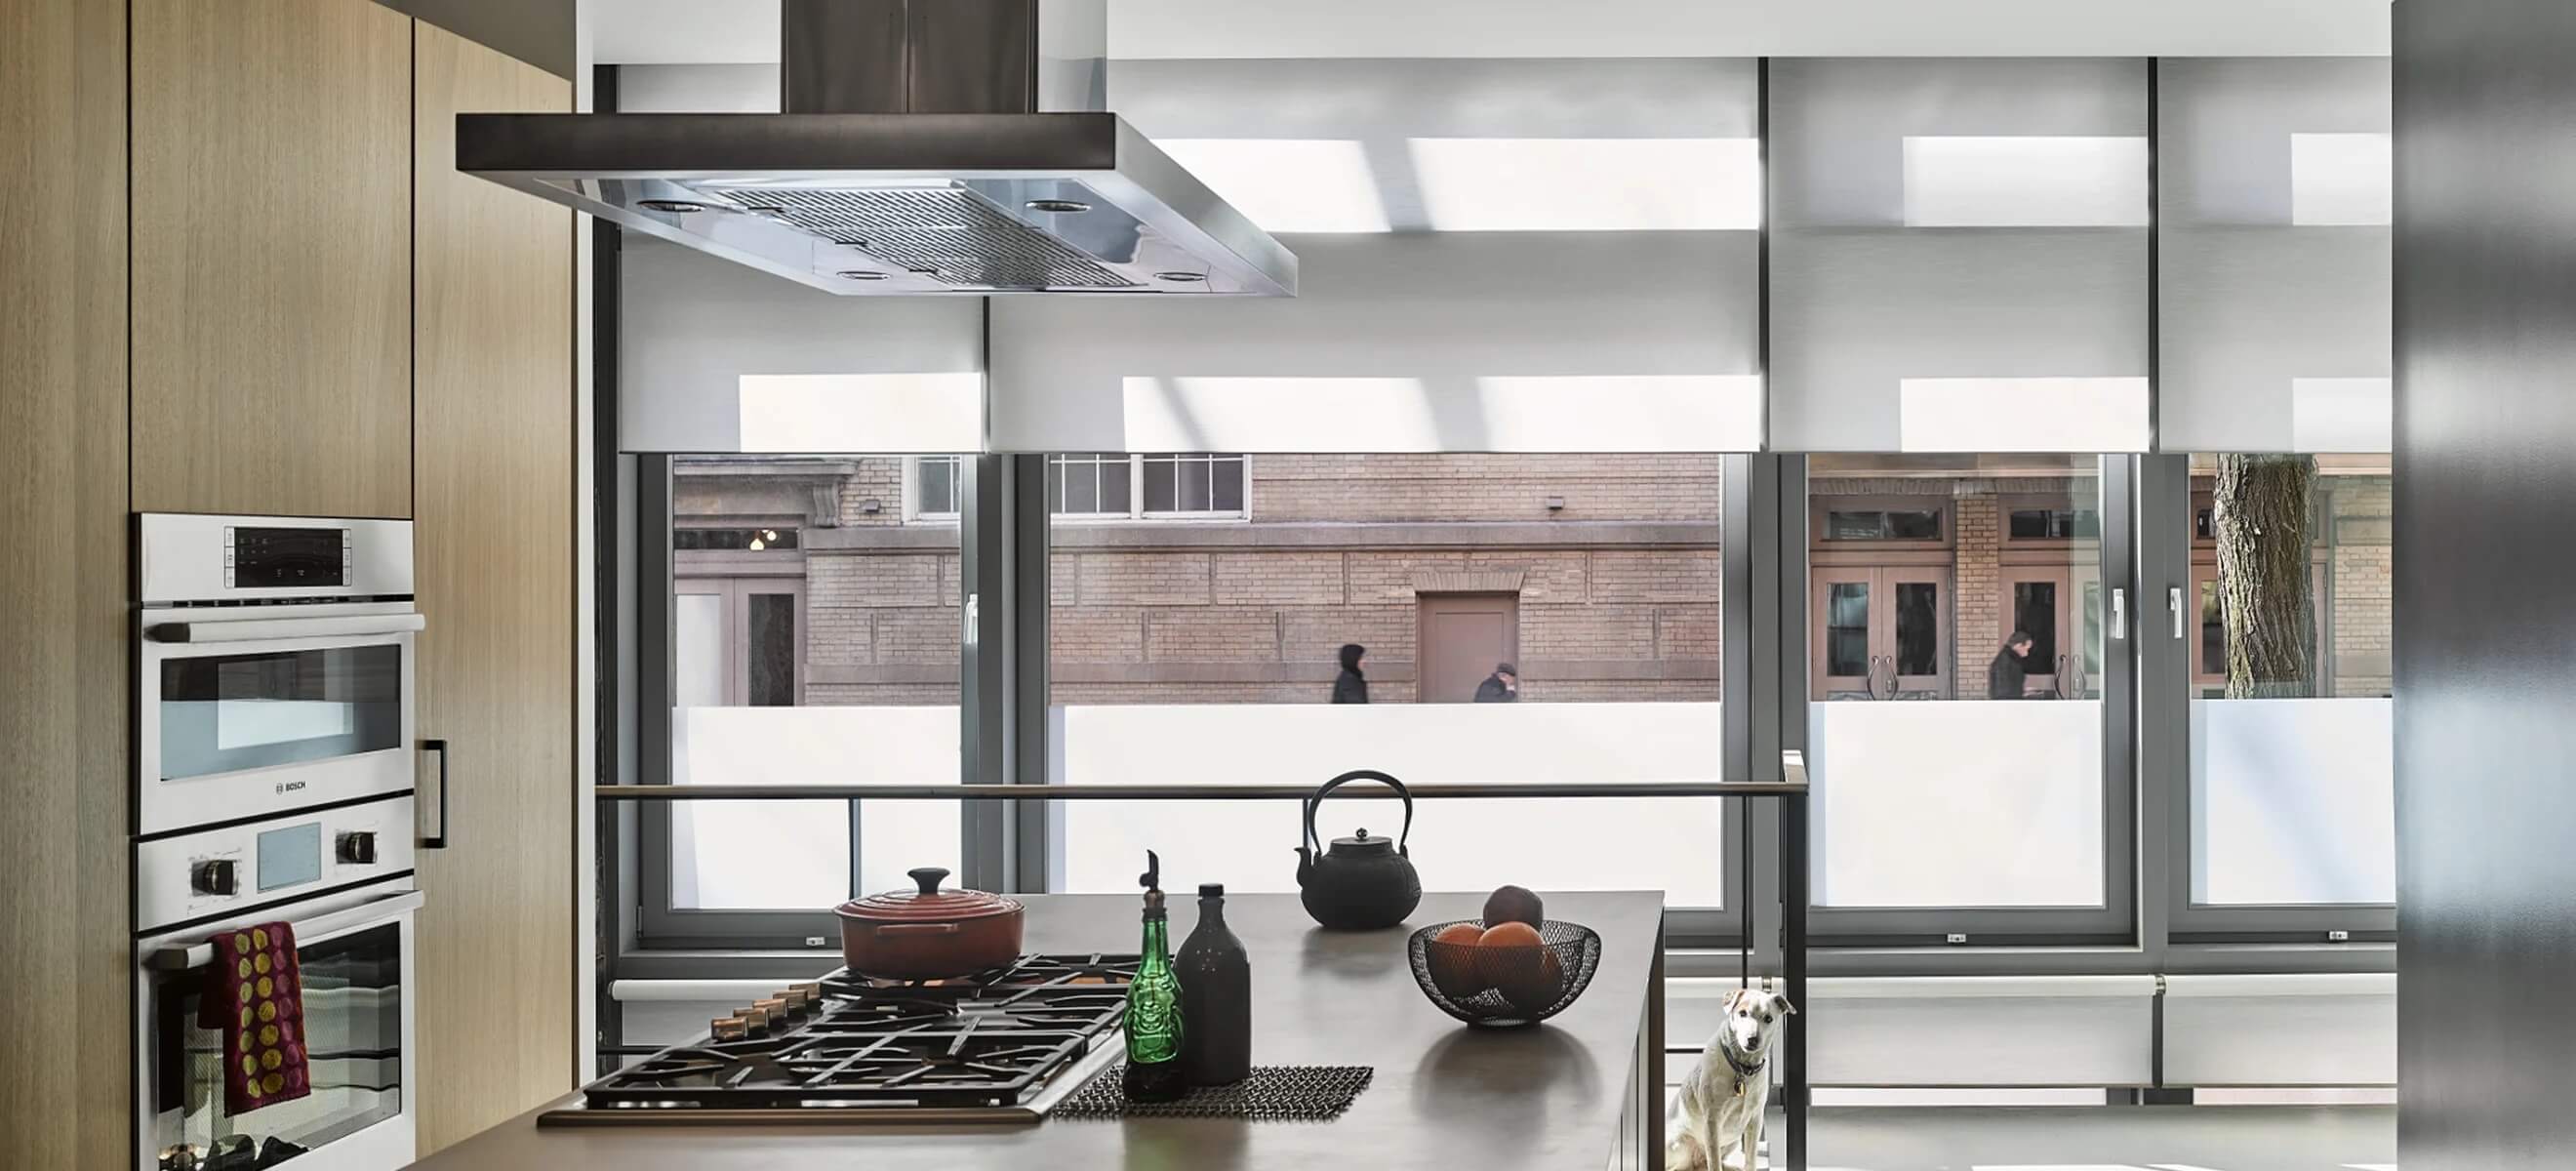 Palladiom Shading System - Automated Blinds in Modern Kitchen